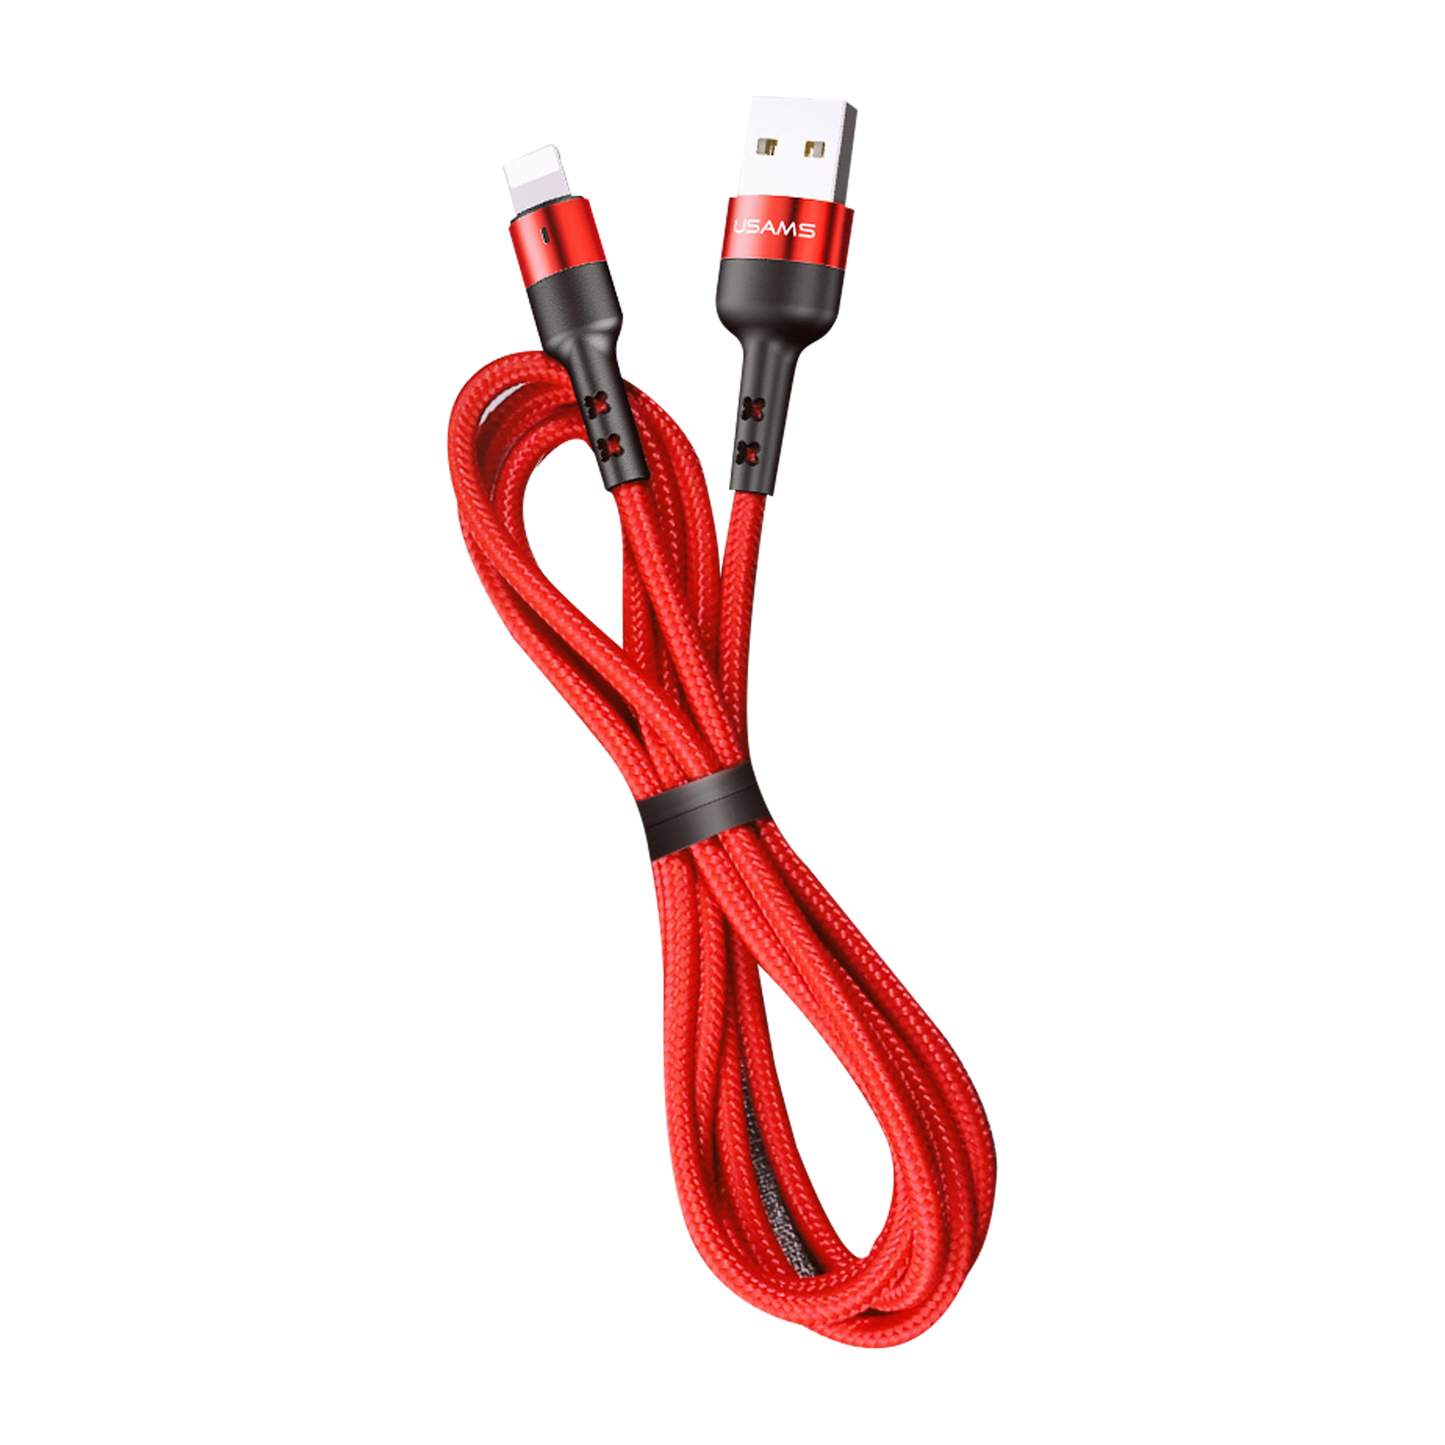 Usams U26 Charging and Data Cable 2m US-SJ314